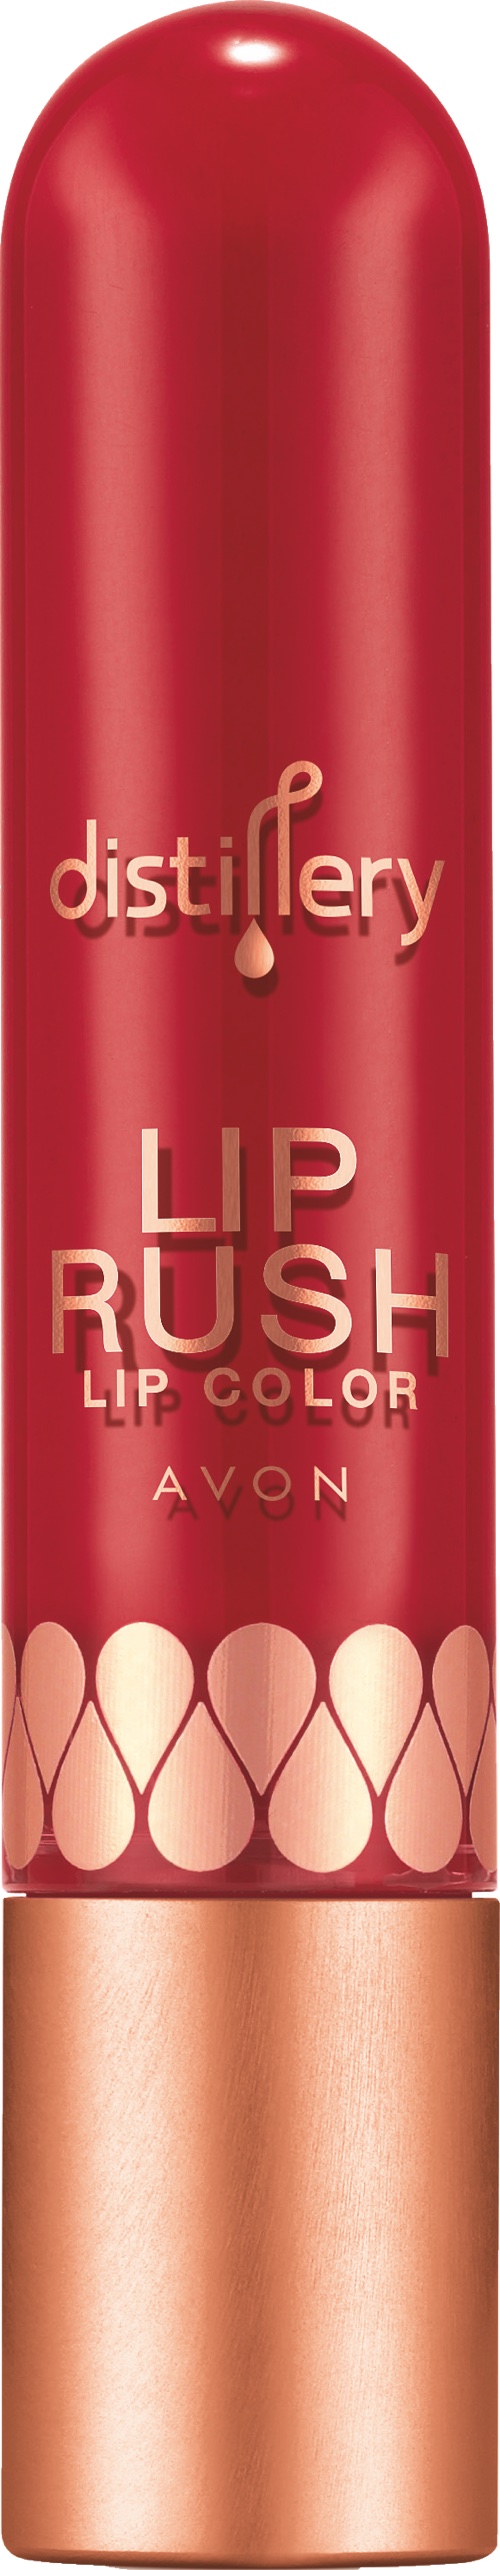 Avon poised to drop second Distillery beauty line